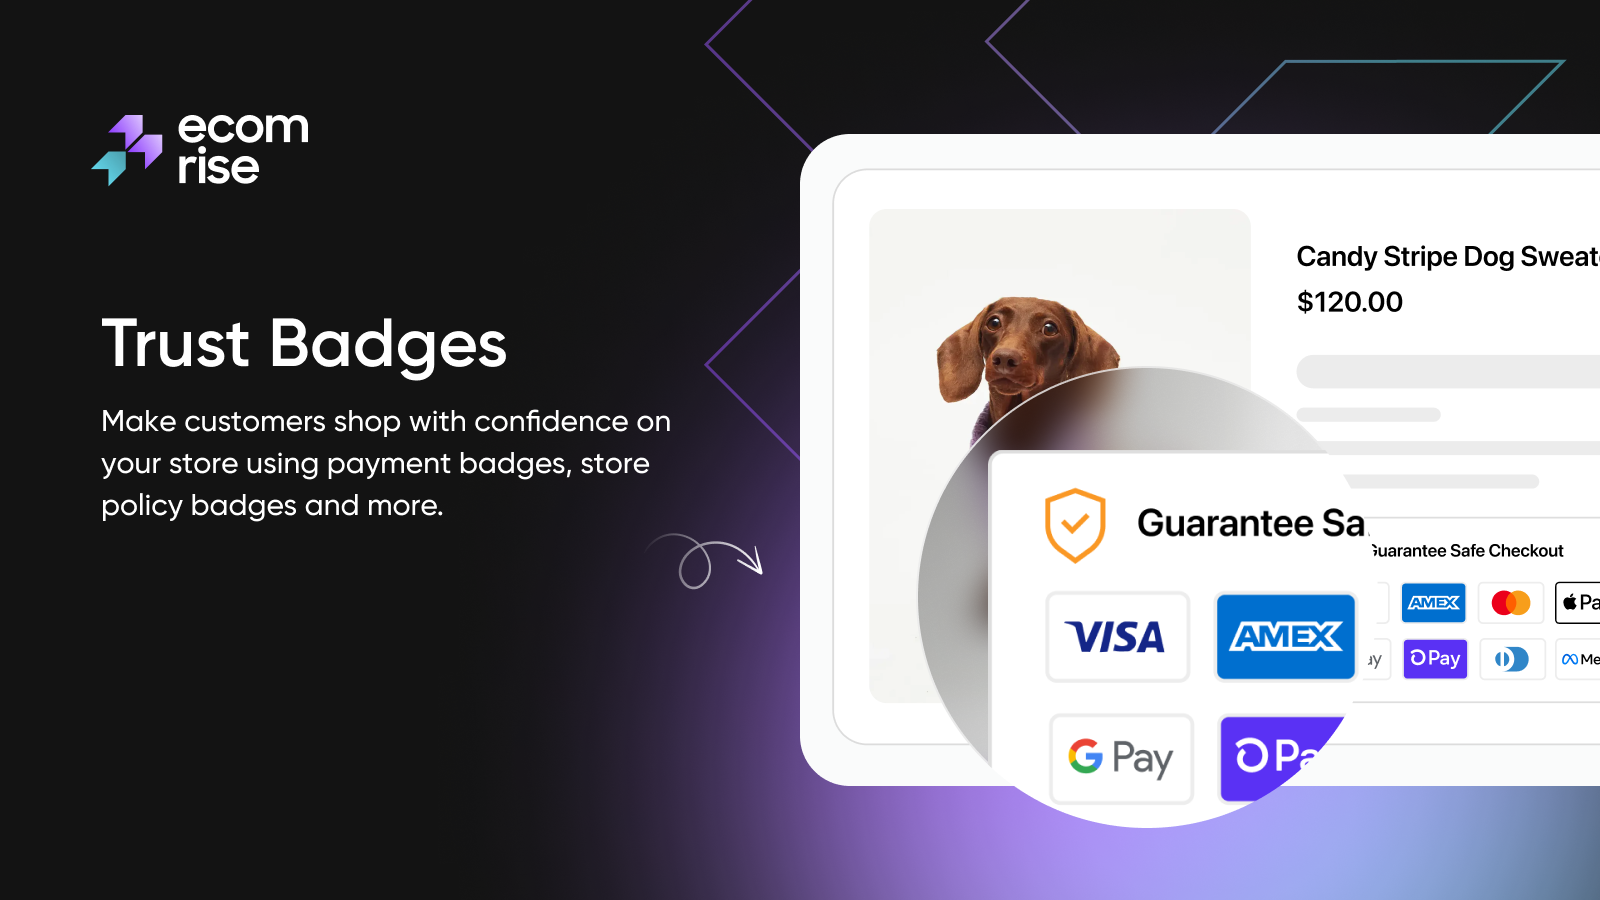 Show payment badges, store policies and more